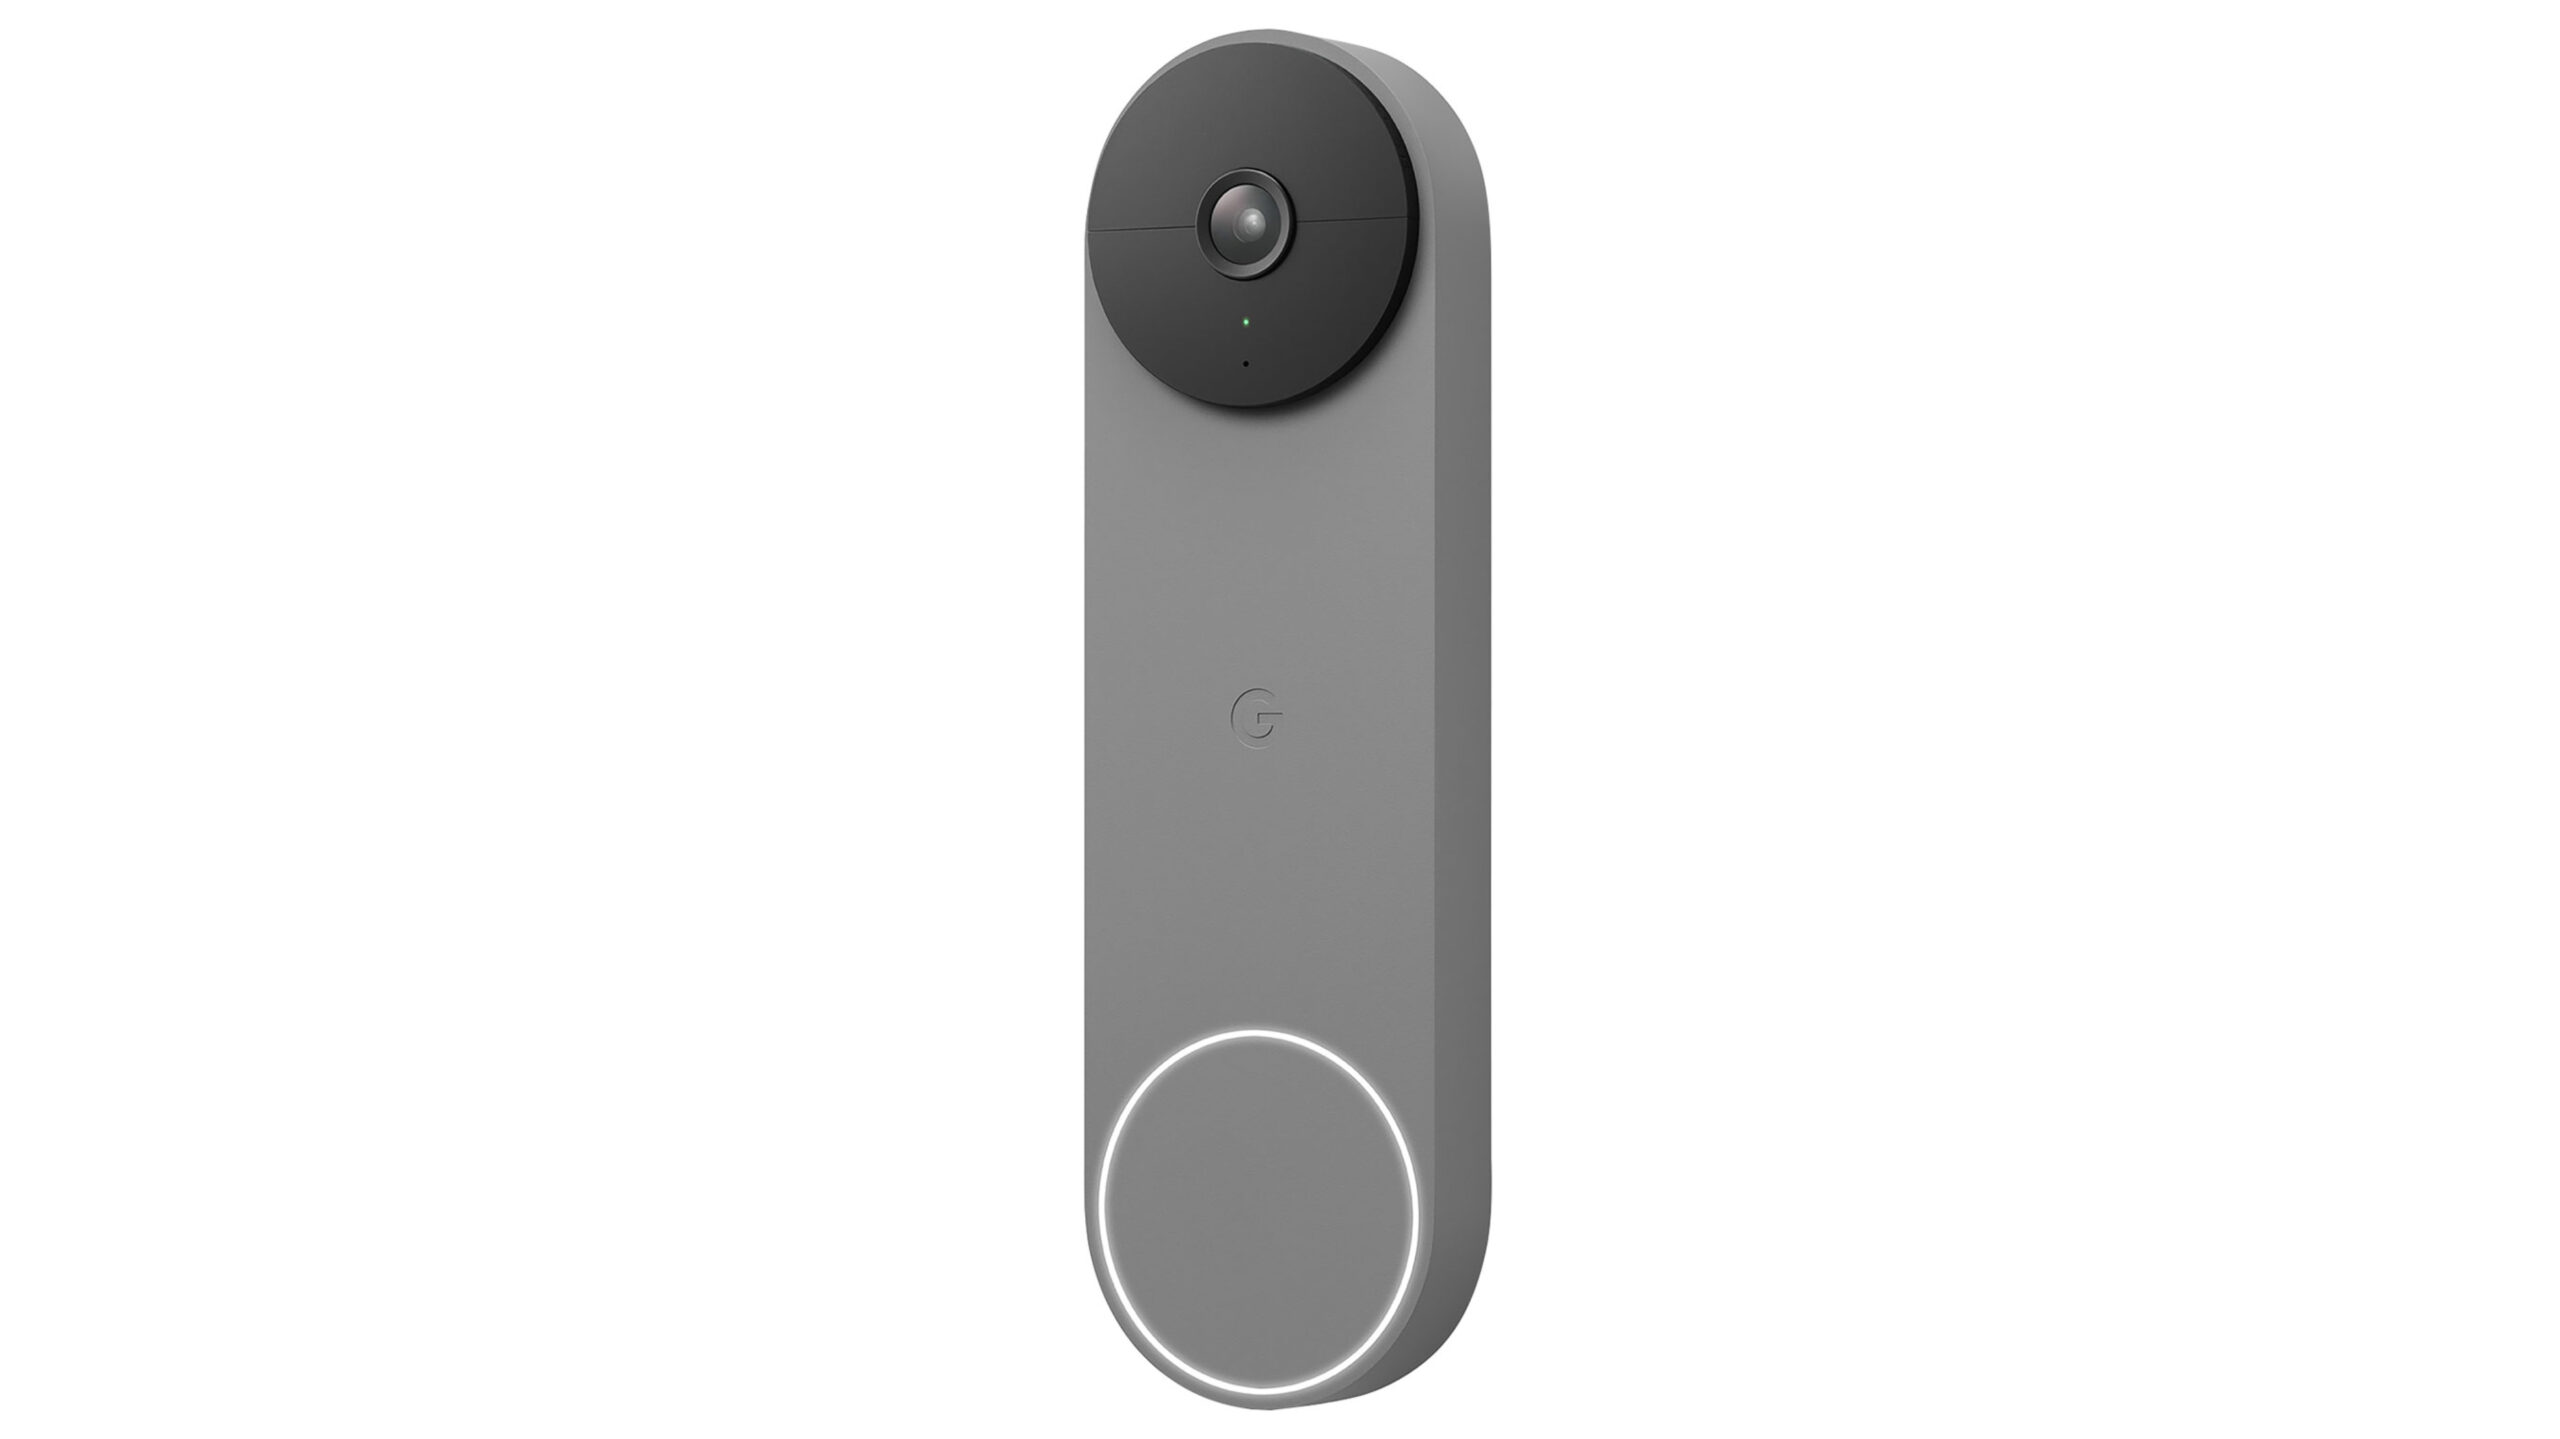 Google’s wired Nest Doorbell appears on store shelves ahead of Oct 6 event thumbnail